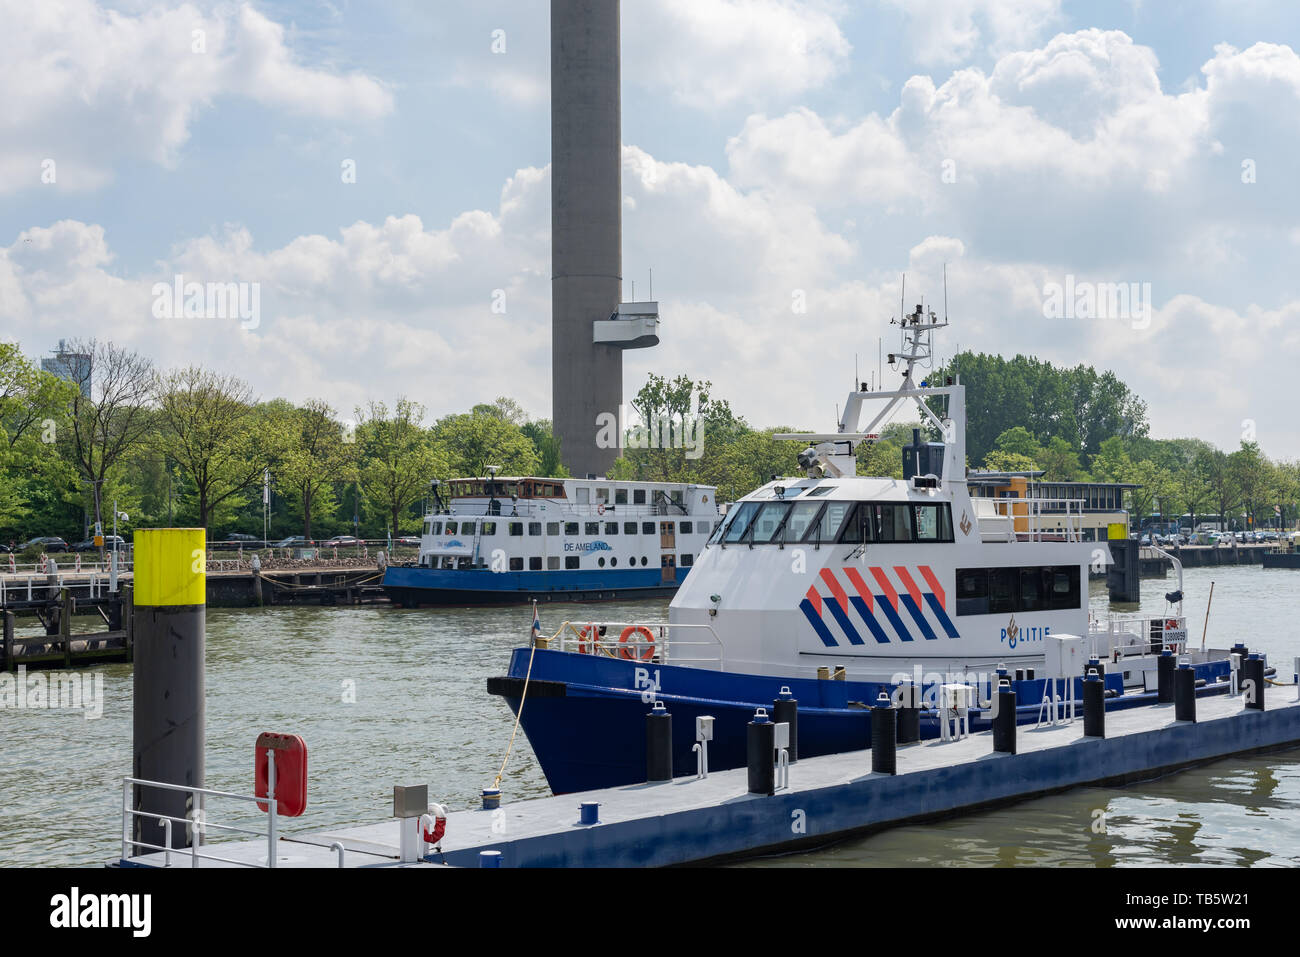 Rotterdam, Netherlands - April 29, 2019 : Rotterdam water police port with a police boat in the foreground Stock Photo